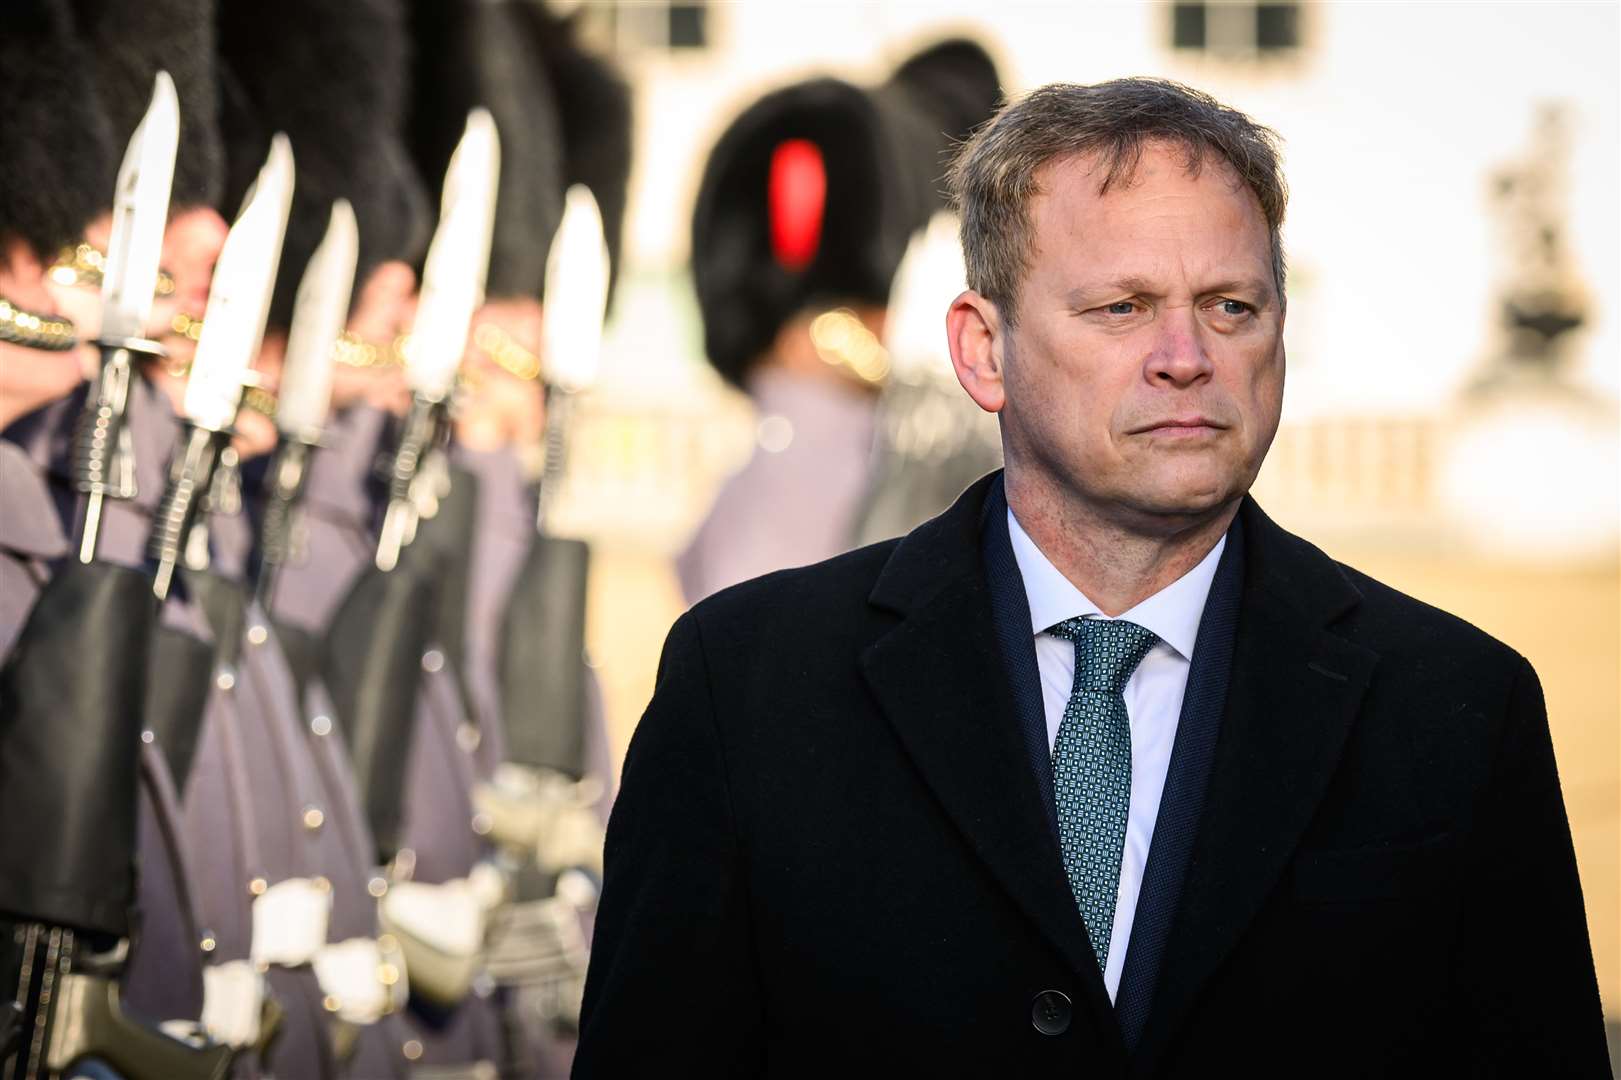 Defence Secretary Grant Shapps was on-board HMS Vanguard during the Trident missile test failure (Leon Neal/PA)